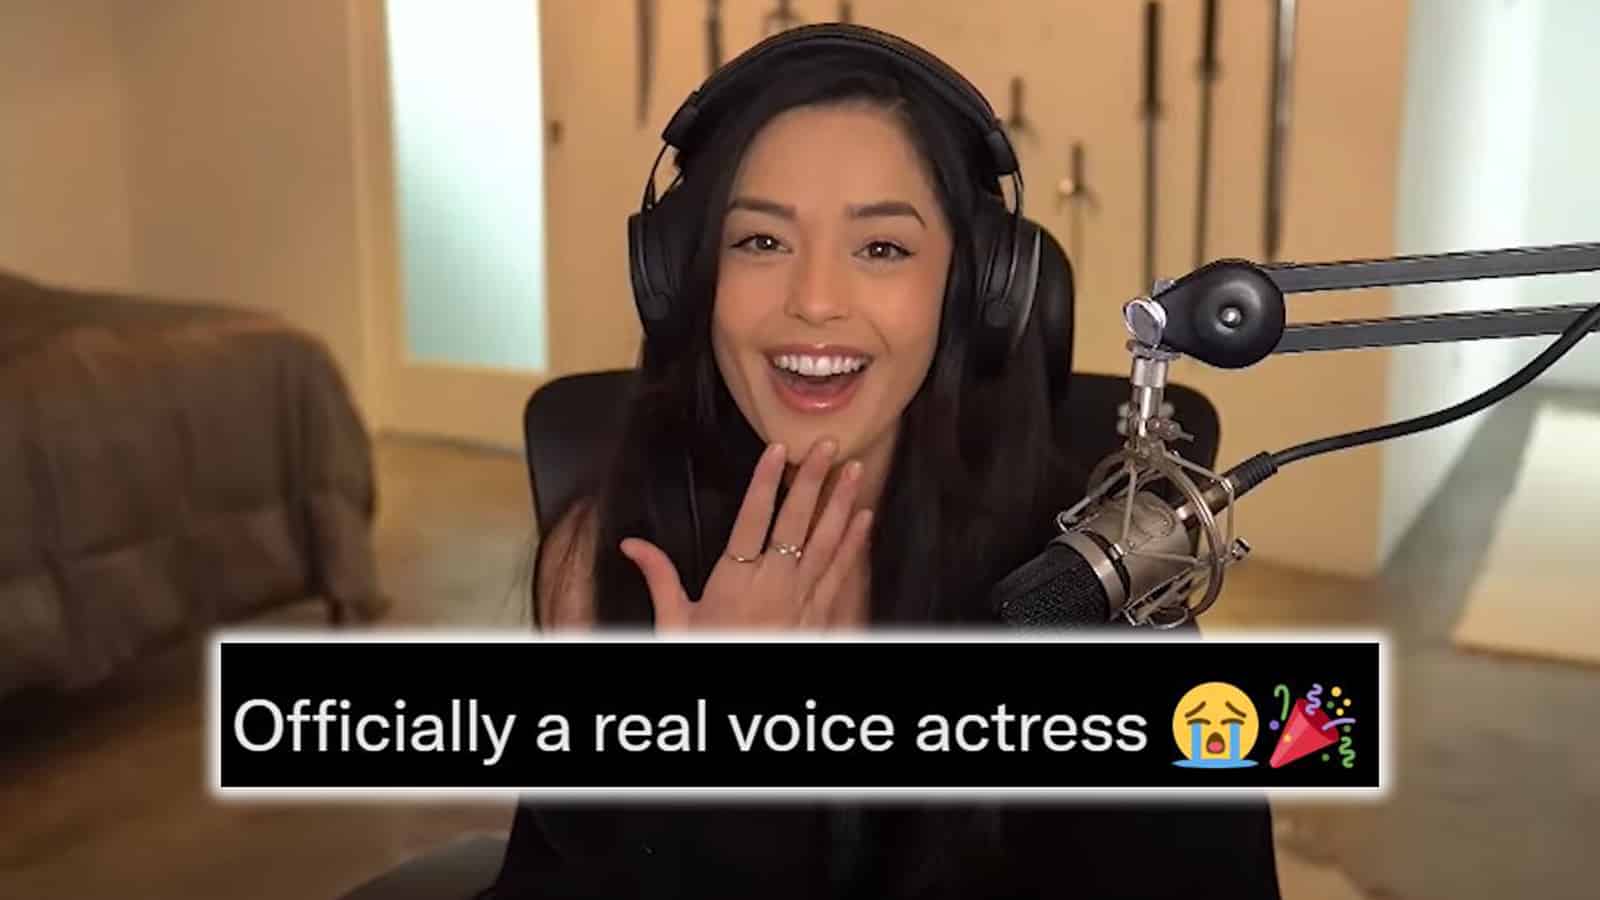 Valkyrae claims shes officially a voice actress